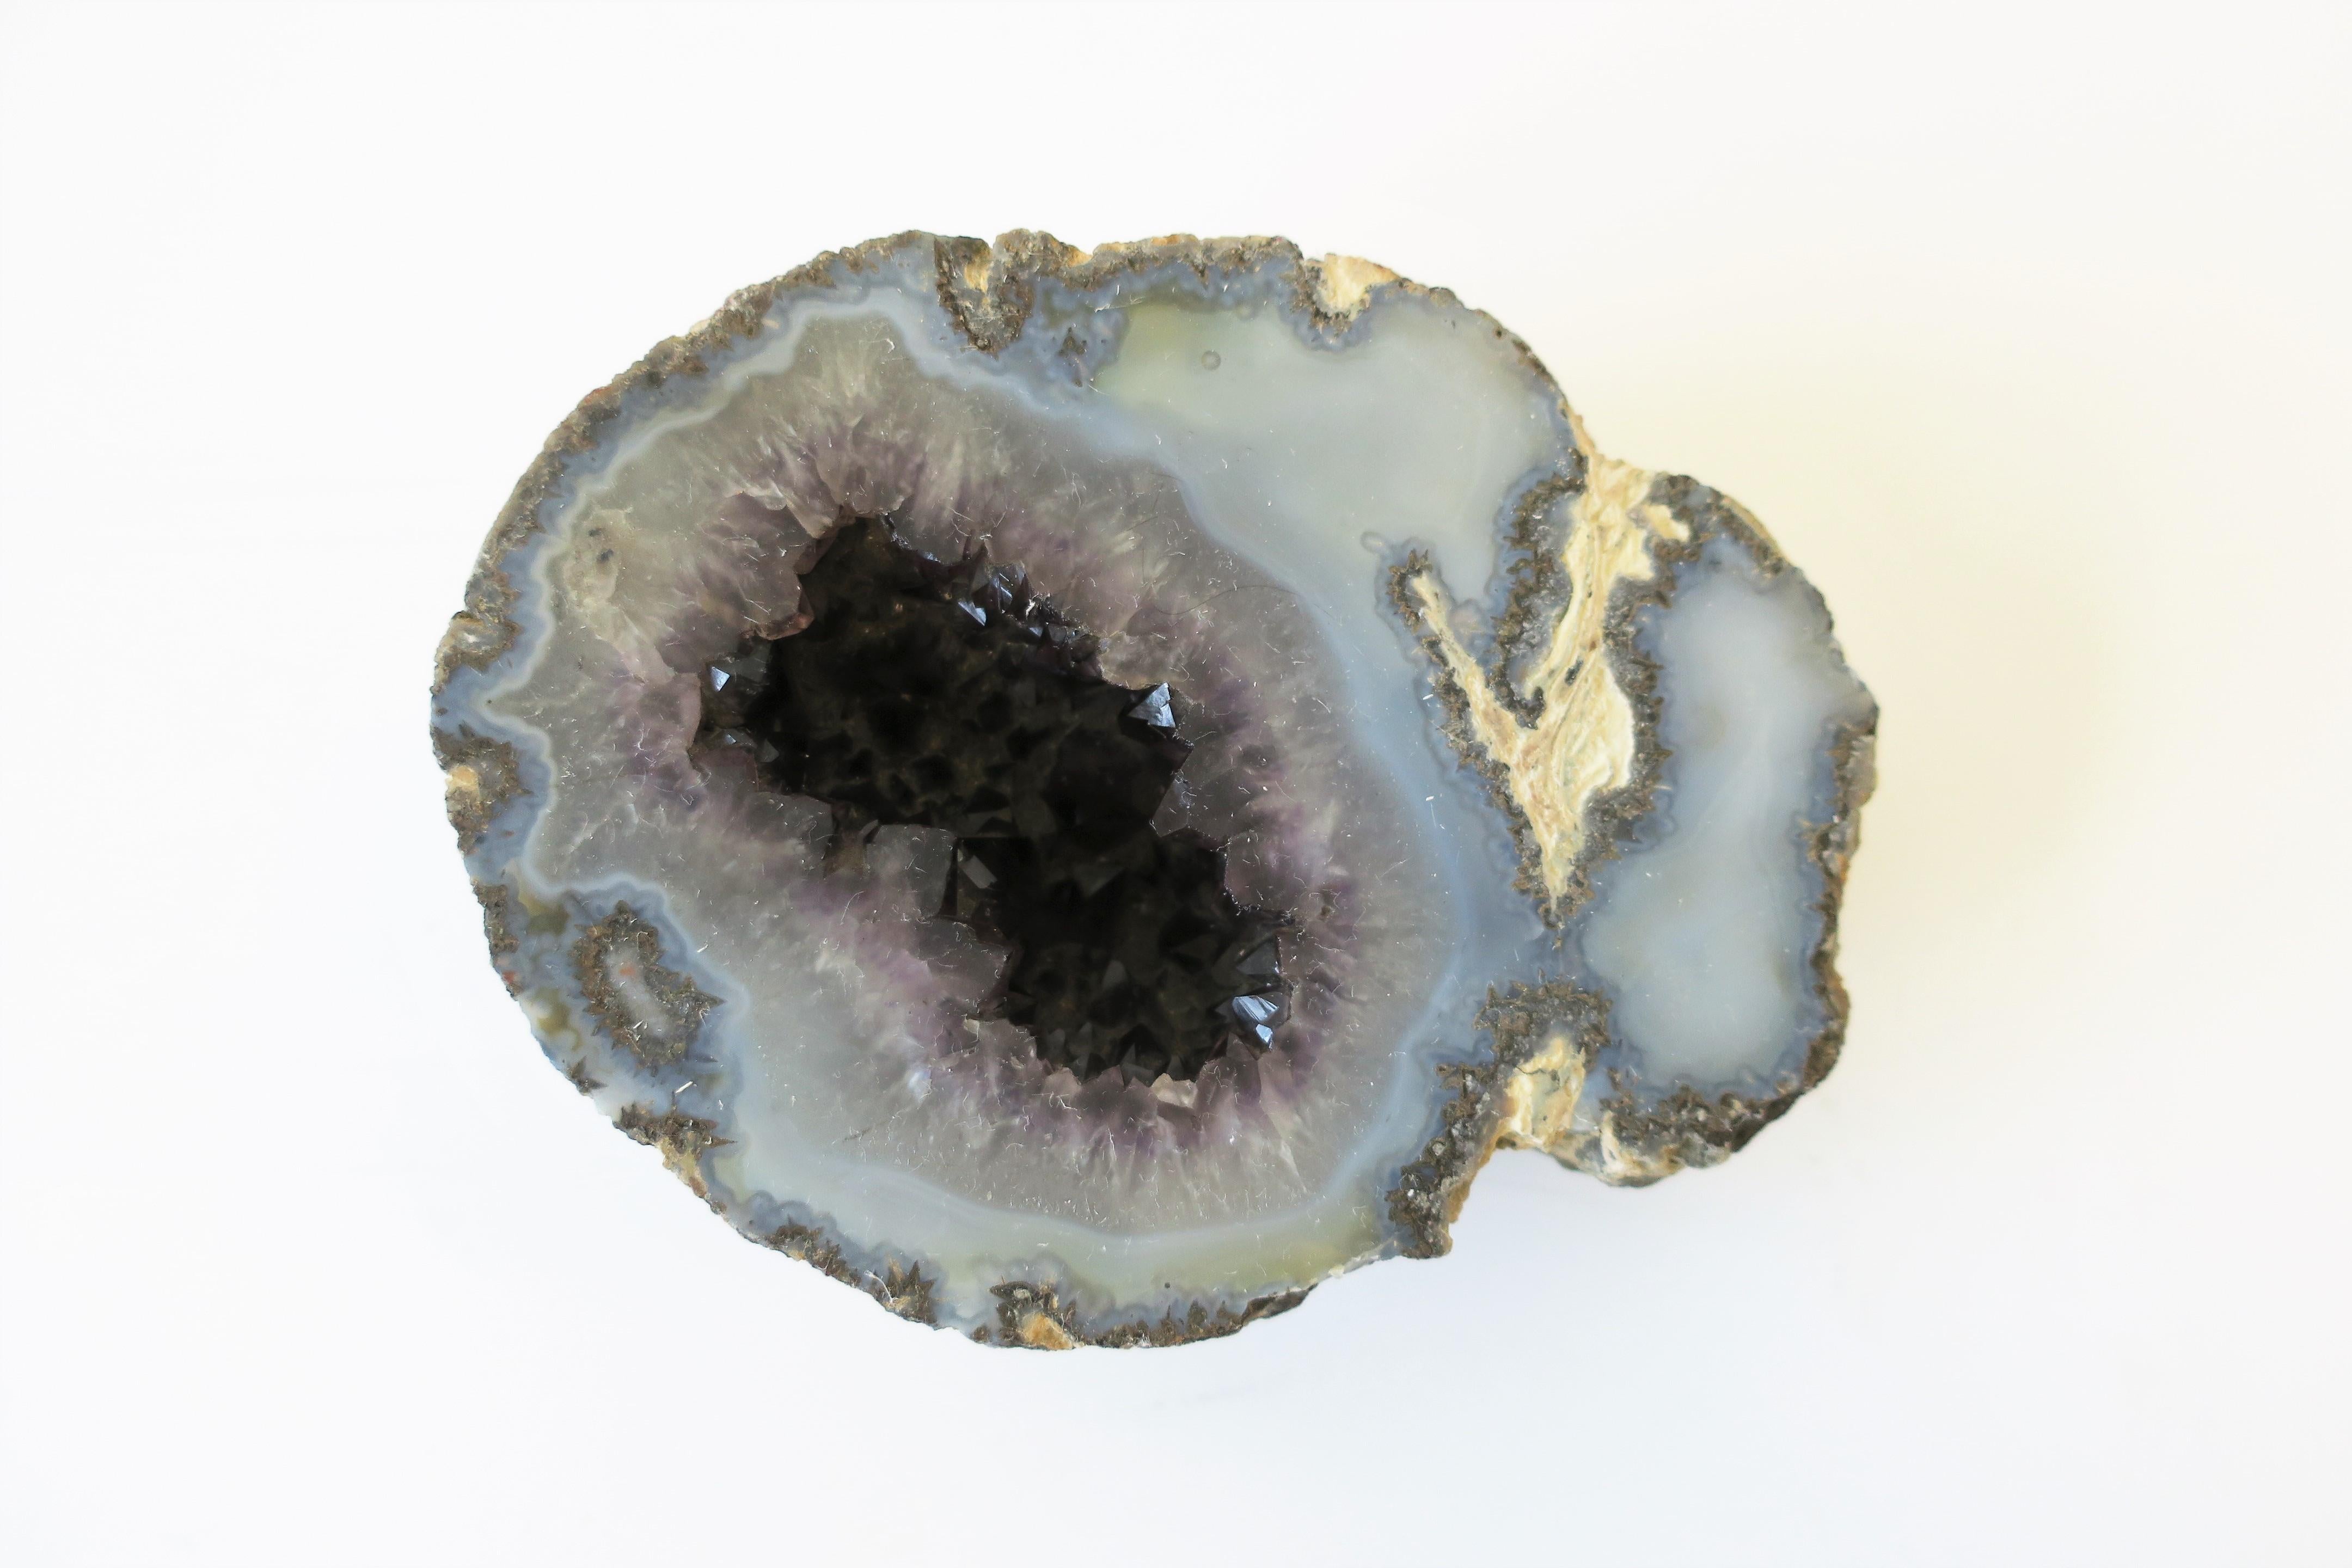 A light blue and purple amethyst geode natural specimen decorative object or paperweight. Piece has a light blue surface with a deep purple amethyst encrusted chasm. Dimensions: 4